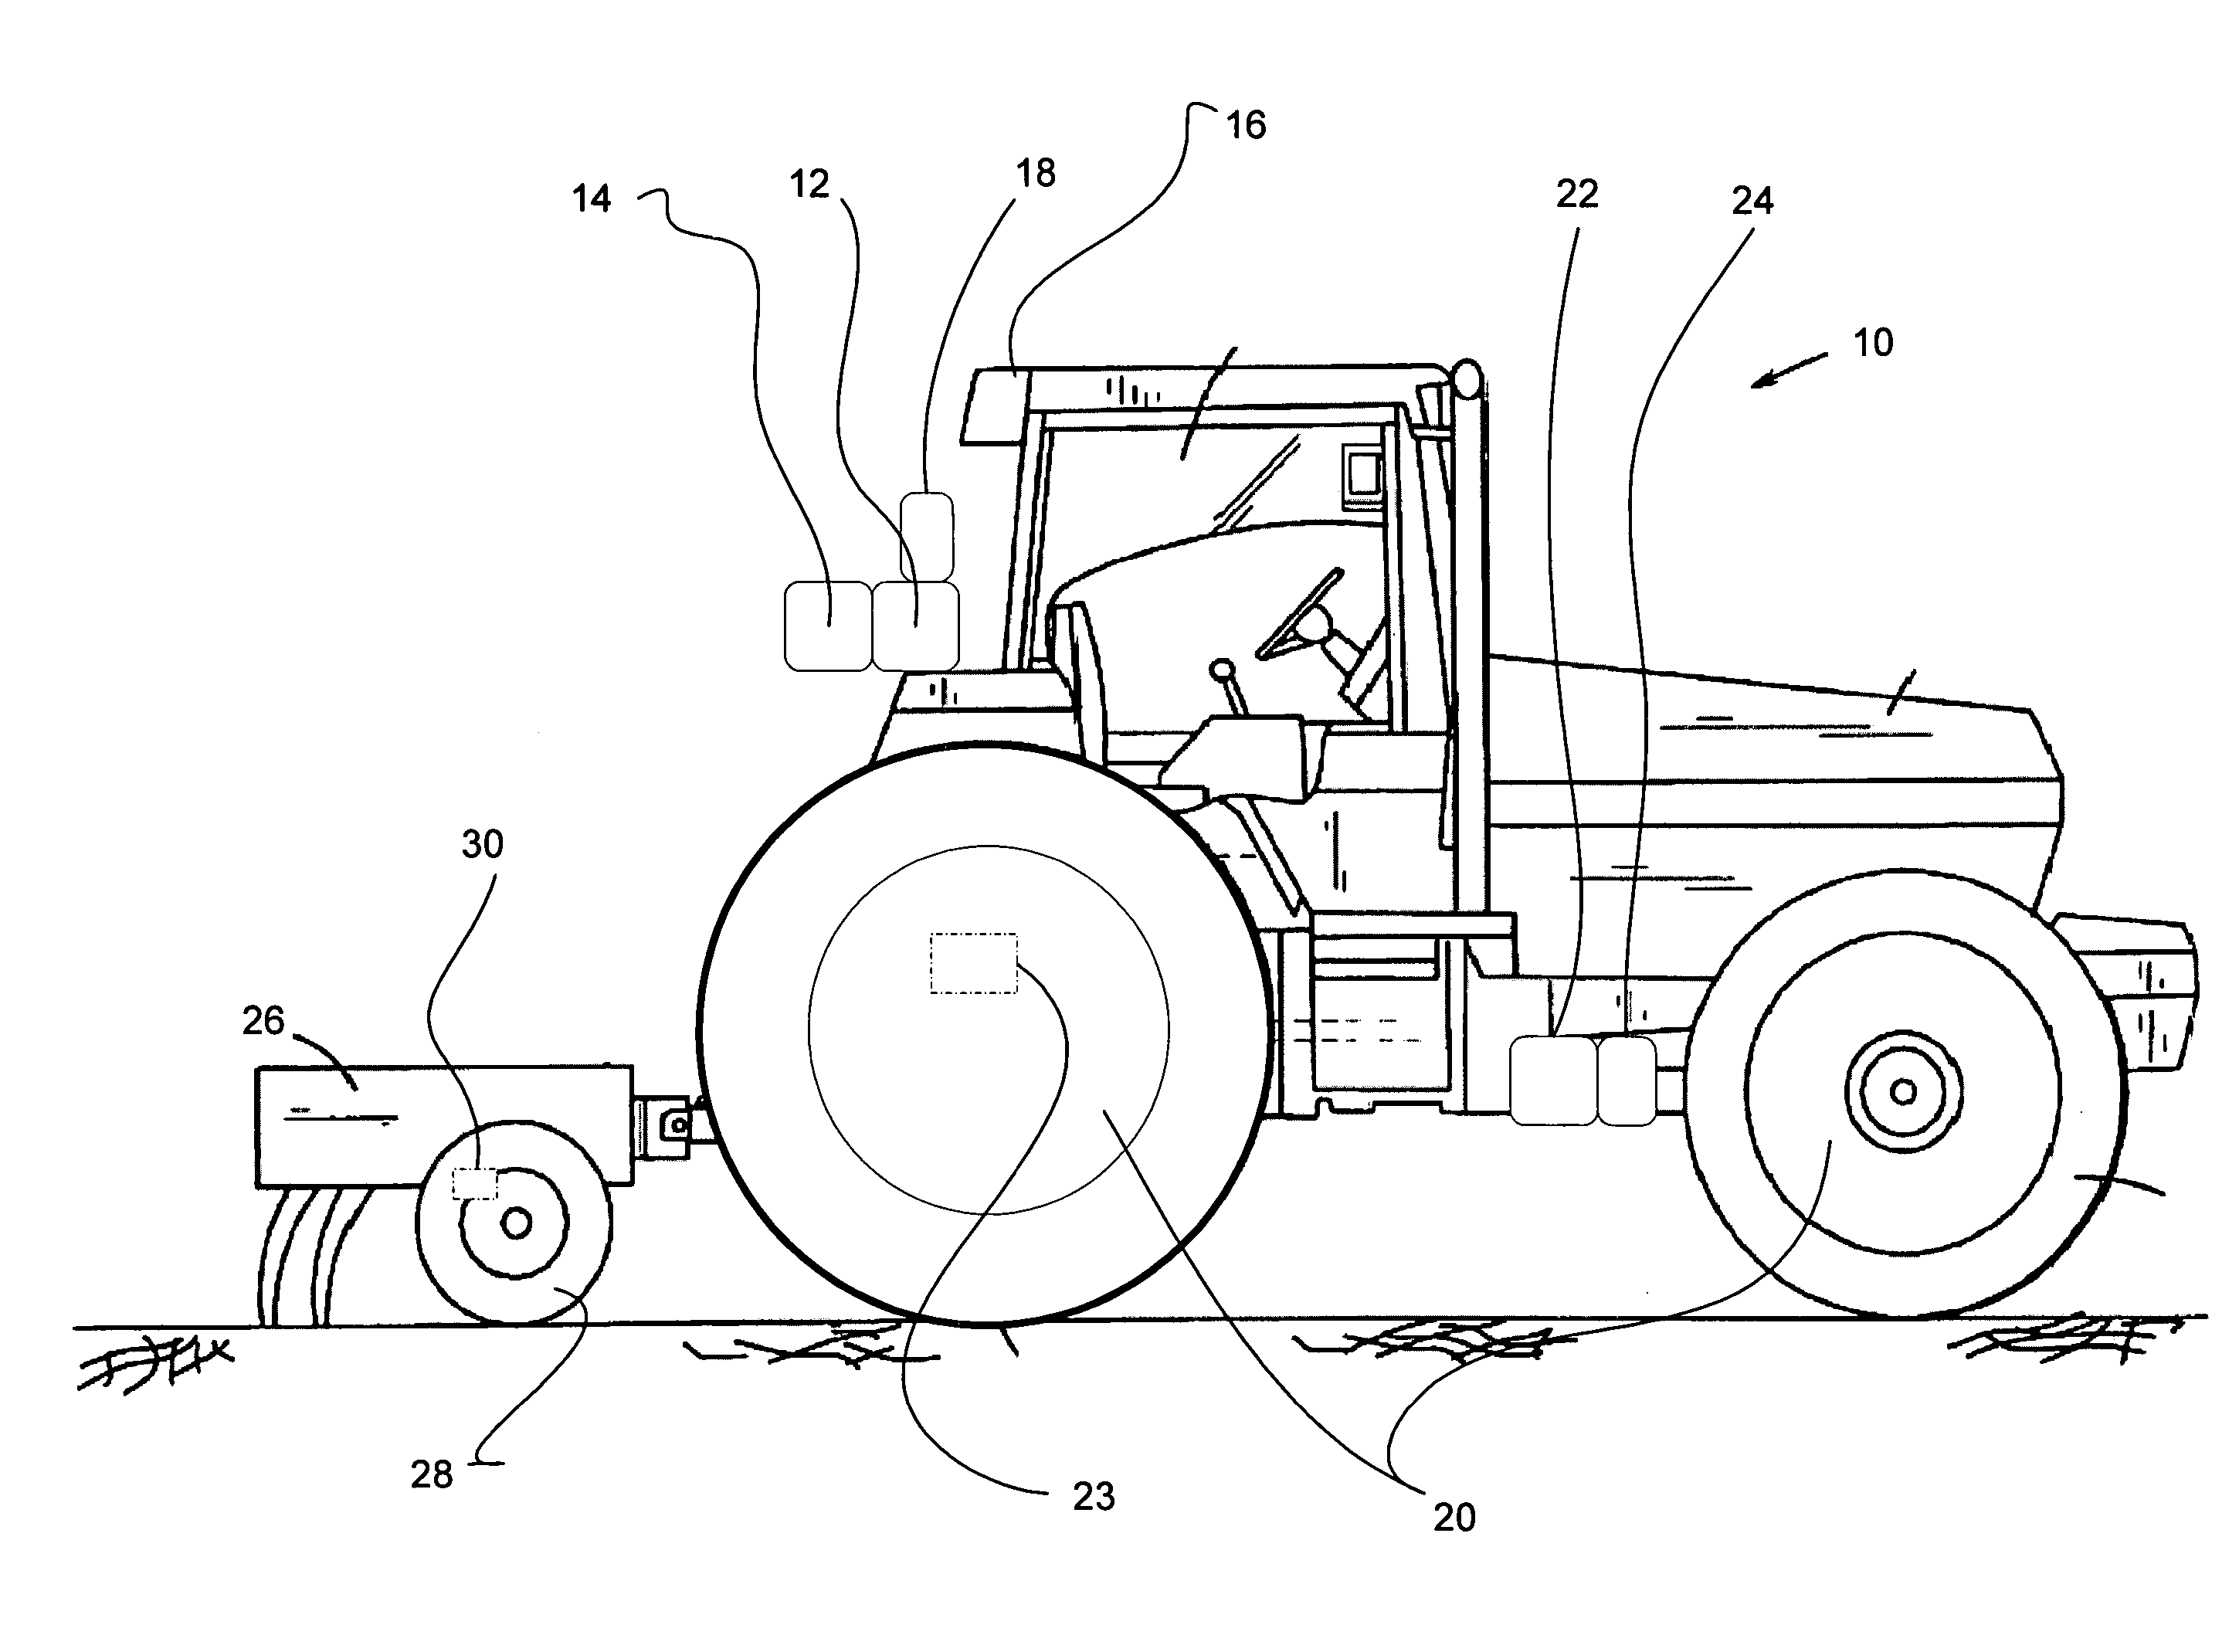 Tire inflation system for use with an agricultural implement